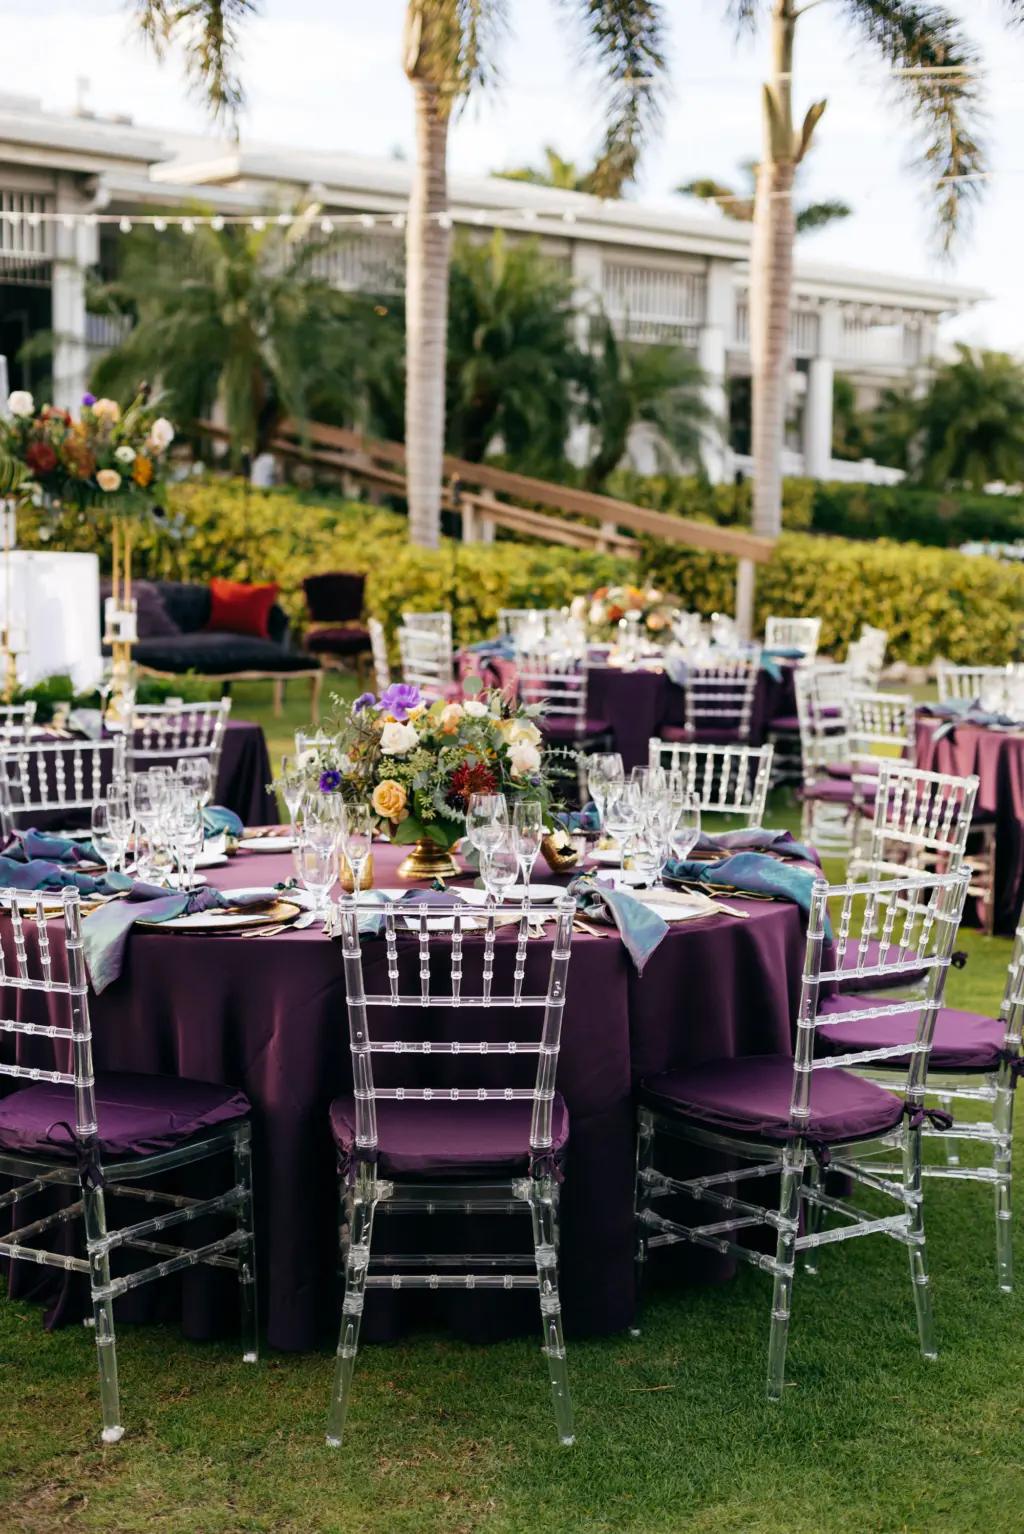 Jewel-Toned Moody Fall Wedding Reception Table Decor Ideas | Ghost Chiavari Chairs | Sarasota Event Venue The Resort at Longboat Key Club | Dark Purple Eggplant Table Linen with Gold Glass Charger Plate and Iridescent Napkin